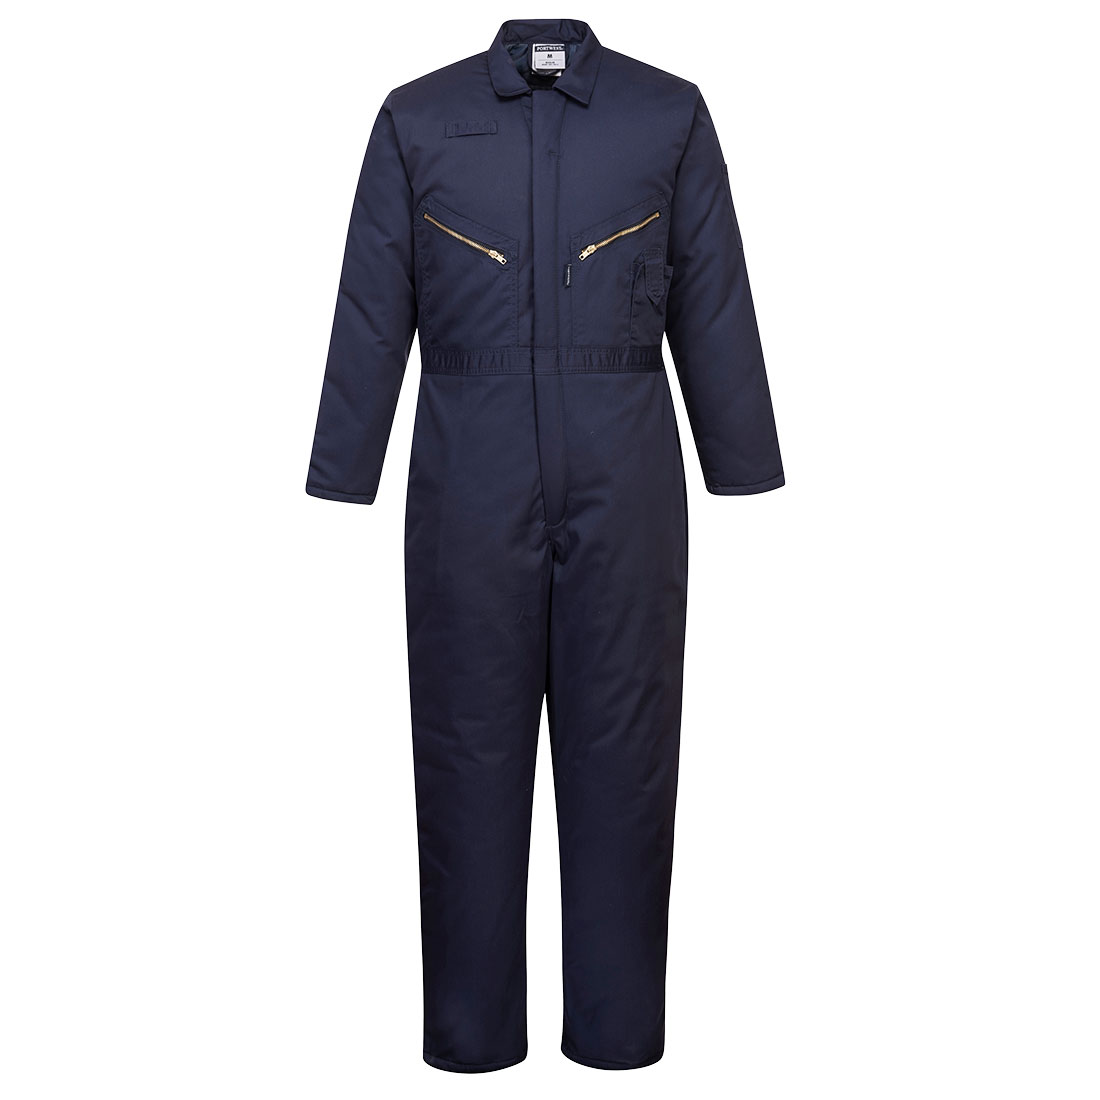 S816 Portwest® Insulated Coveralls - navy